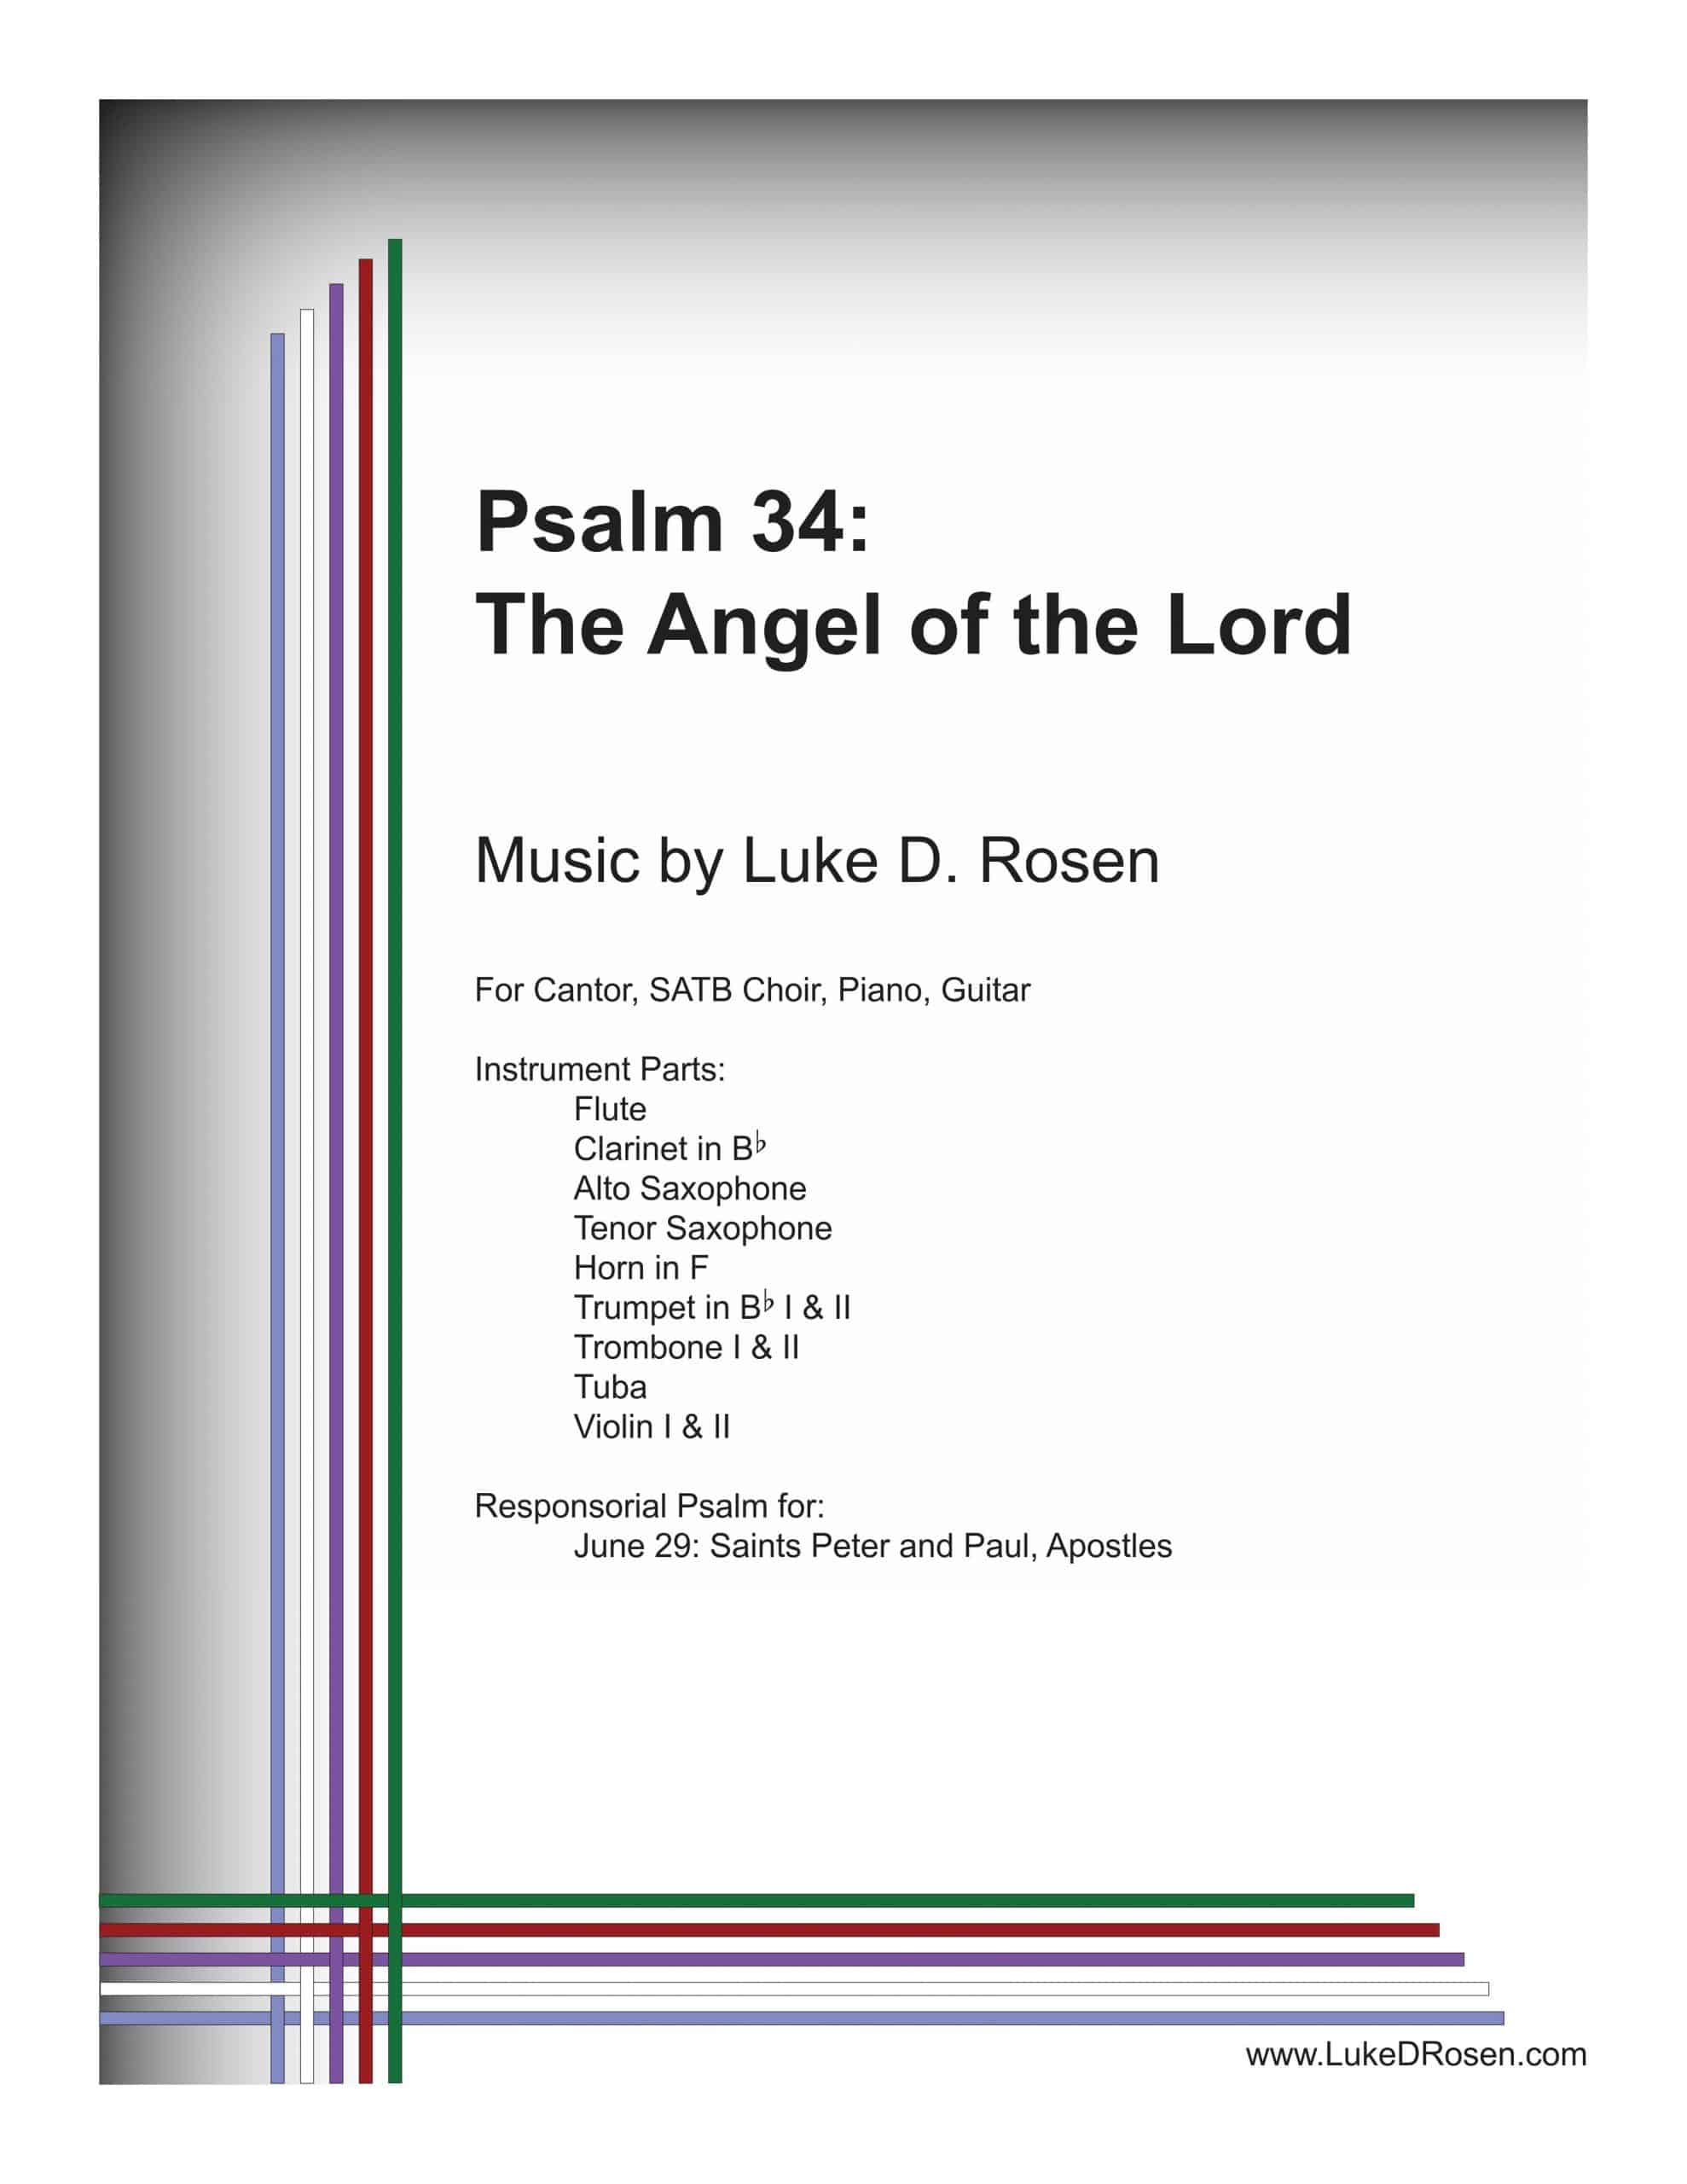 Psalm 34 – The Angel of the Lord (Rosen)